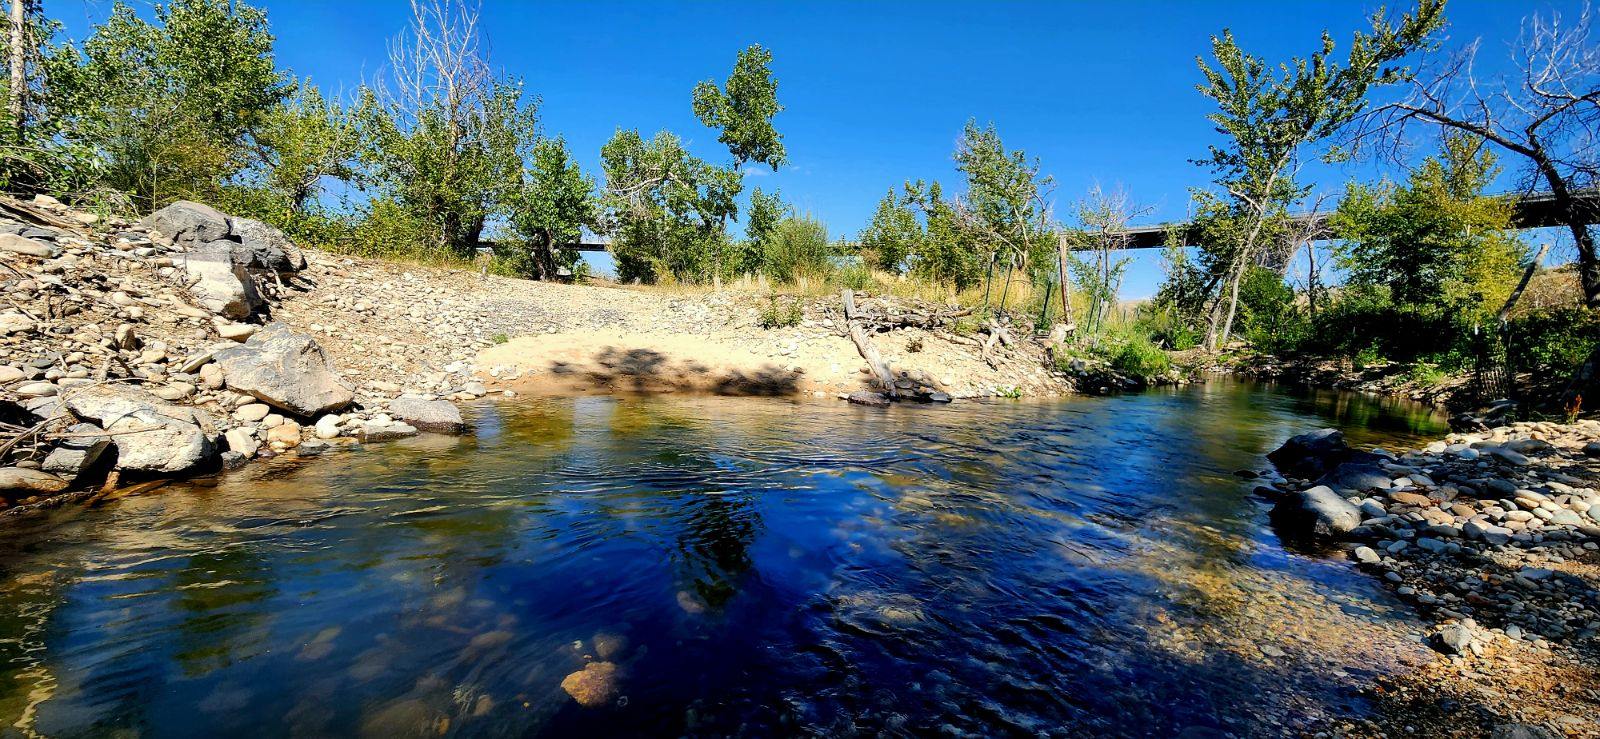 a landscape view shows the cool and shady river side channel, surrounded by tall cottonwood trees, newly-planted shrub seedlings, and rocky banks. The highway 21 bridge is just visible in the background through the tree canopy